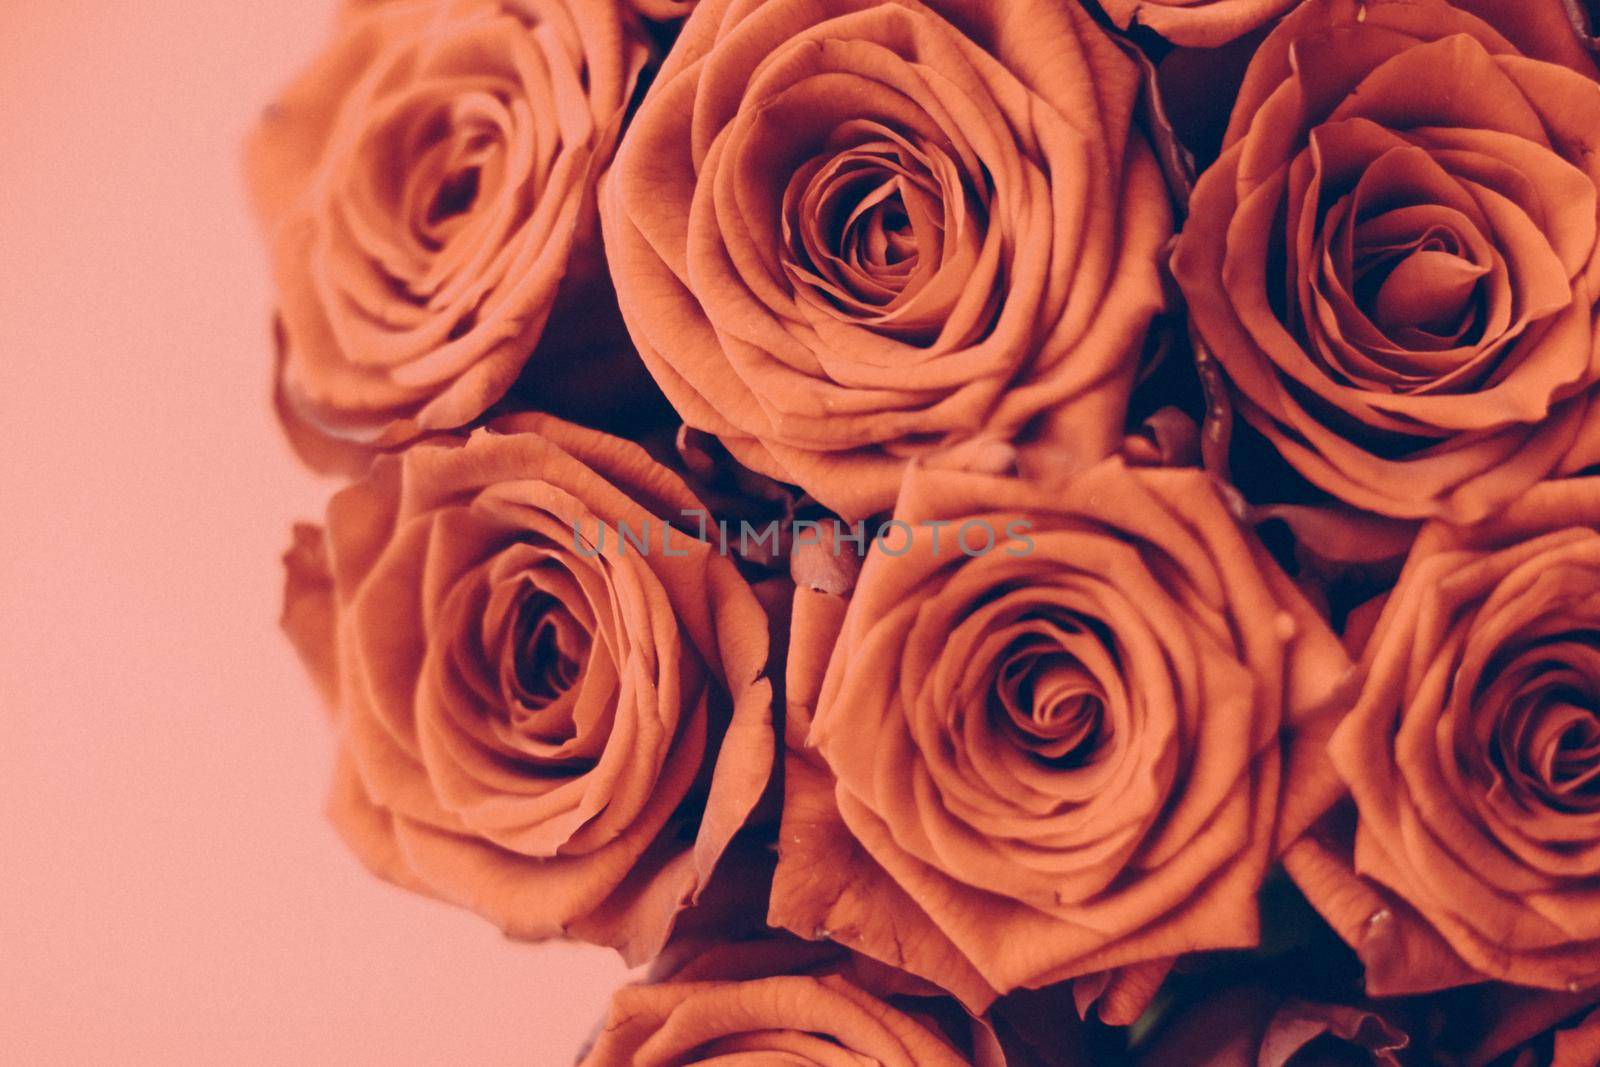 Blooming rose, flower blossom and Valentines Day gift concept - Vintage luxury bouquet of orange roses, flowers in bloom as floral holiday background